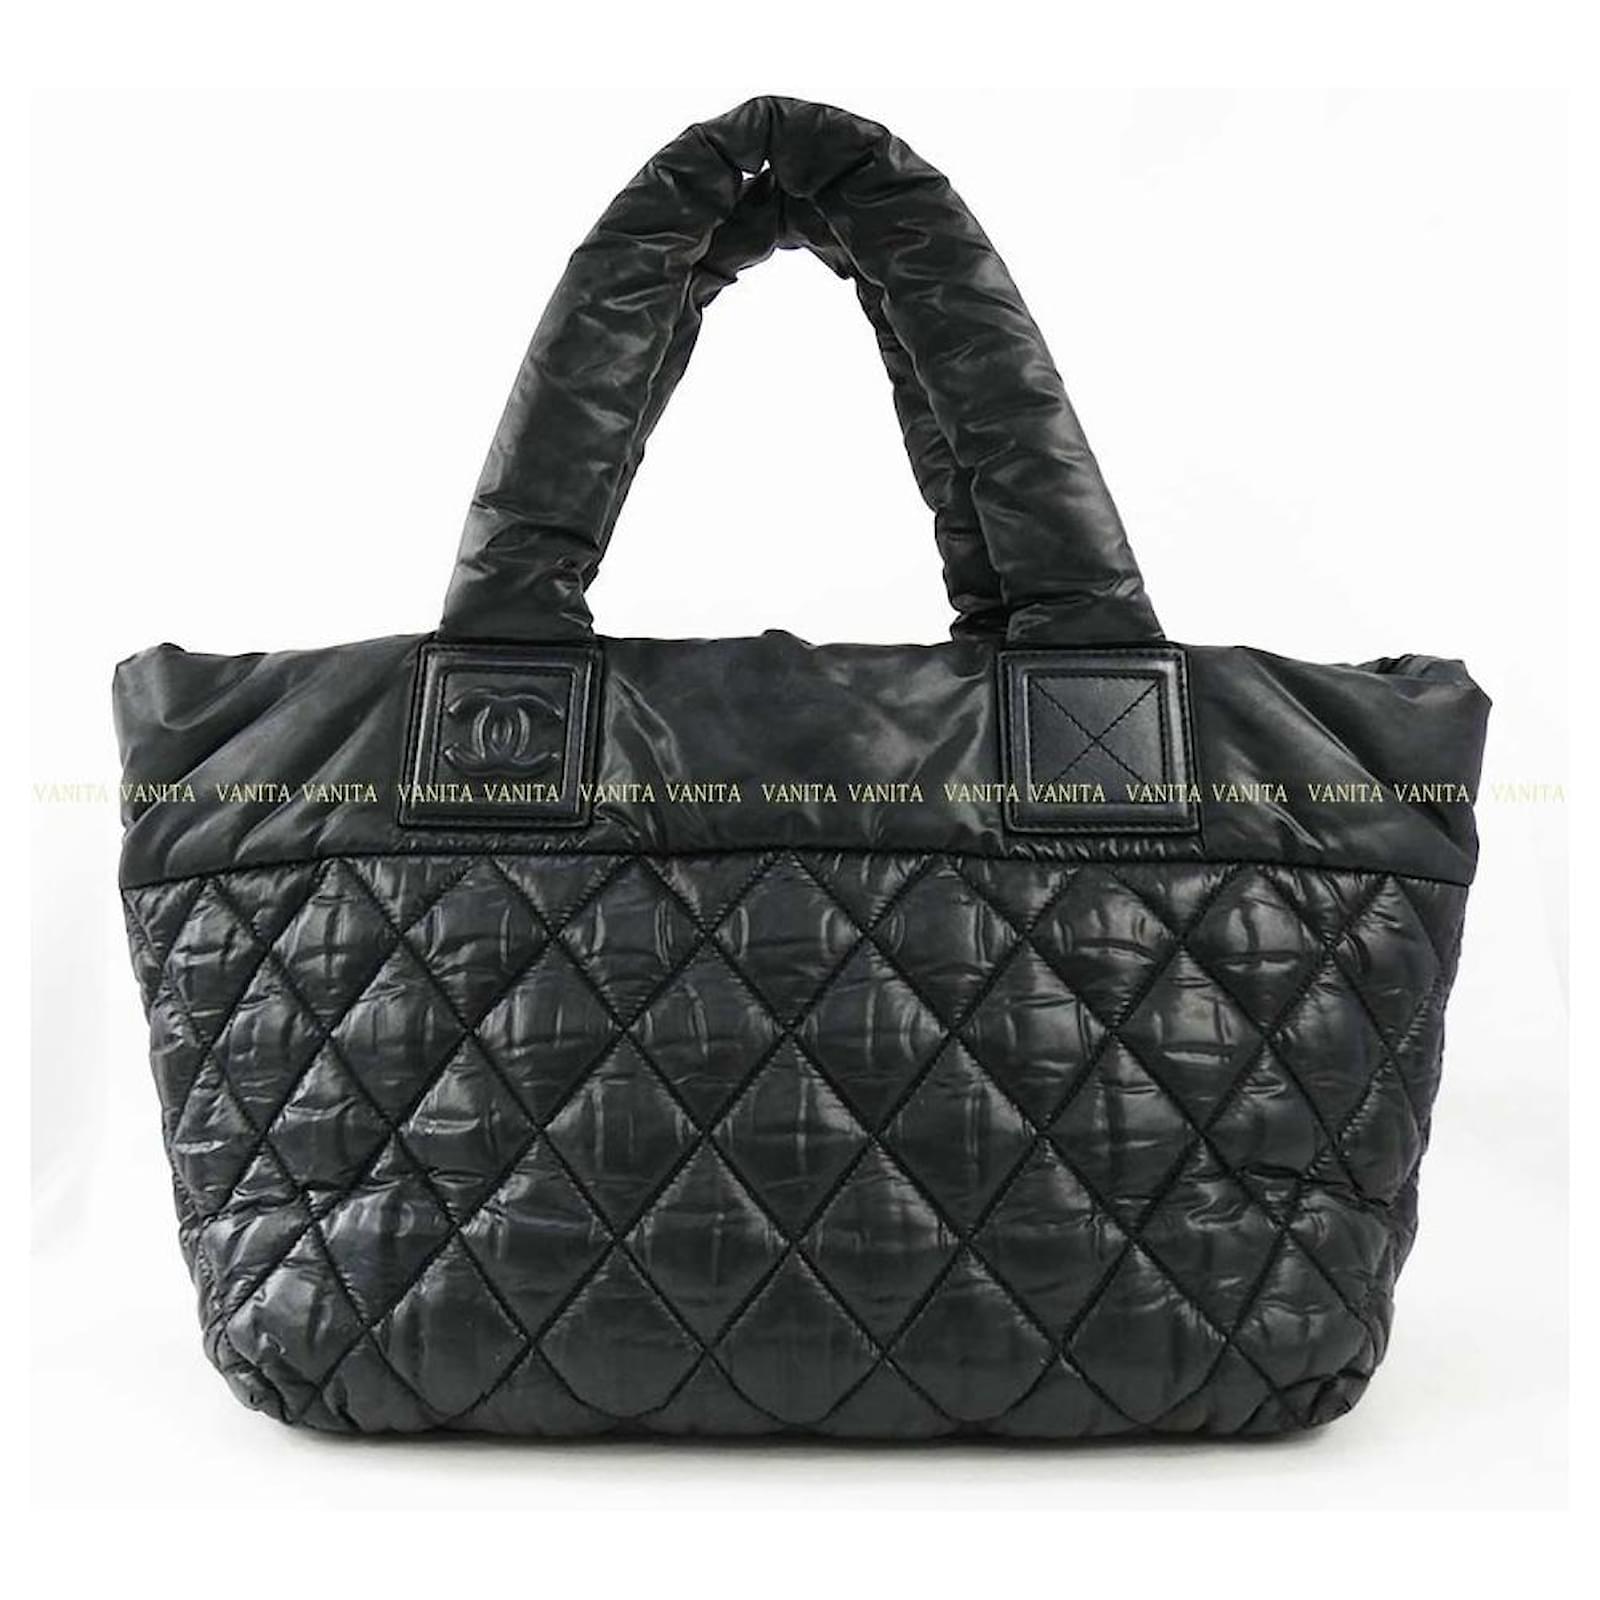 CHANEL COCO COCOON Nylon Tote Bag Black Women Authentic Used from Japan